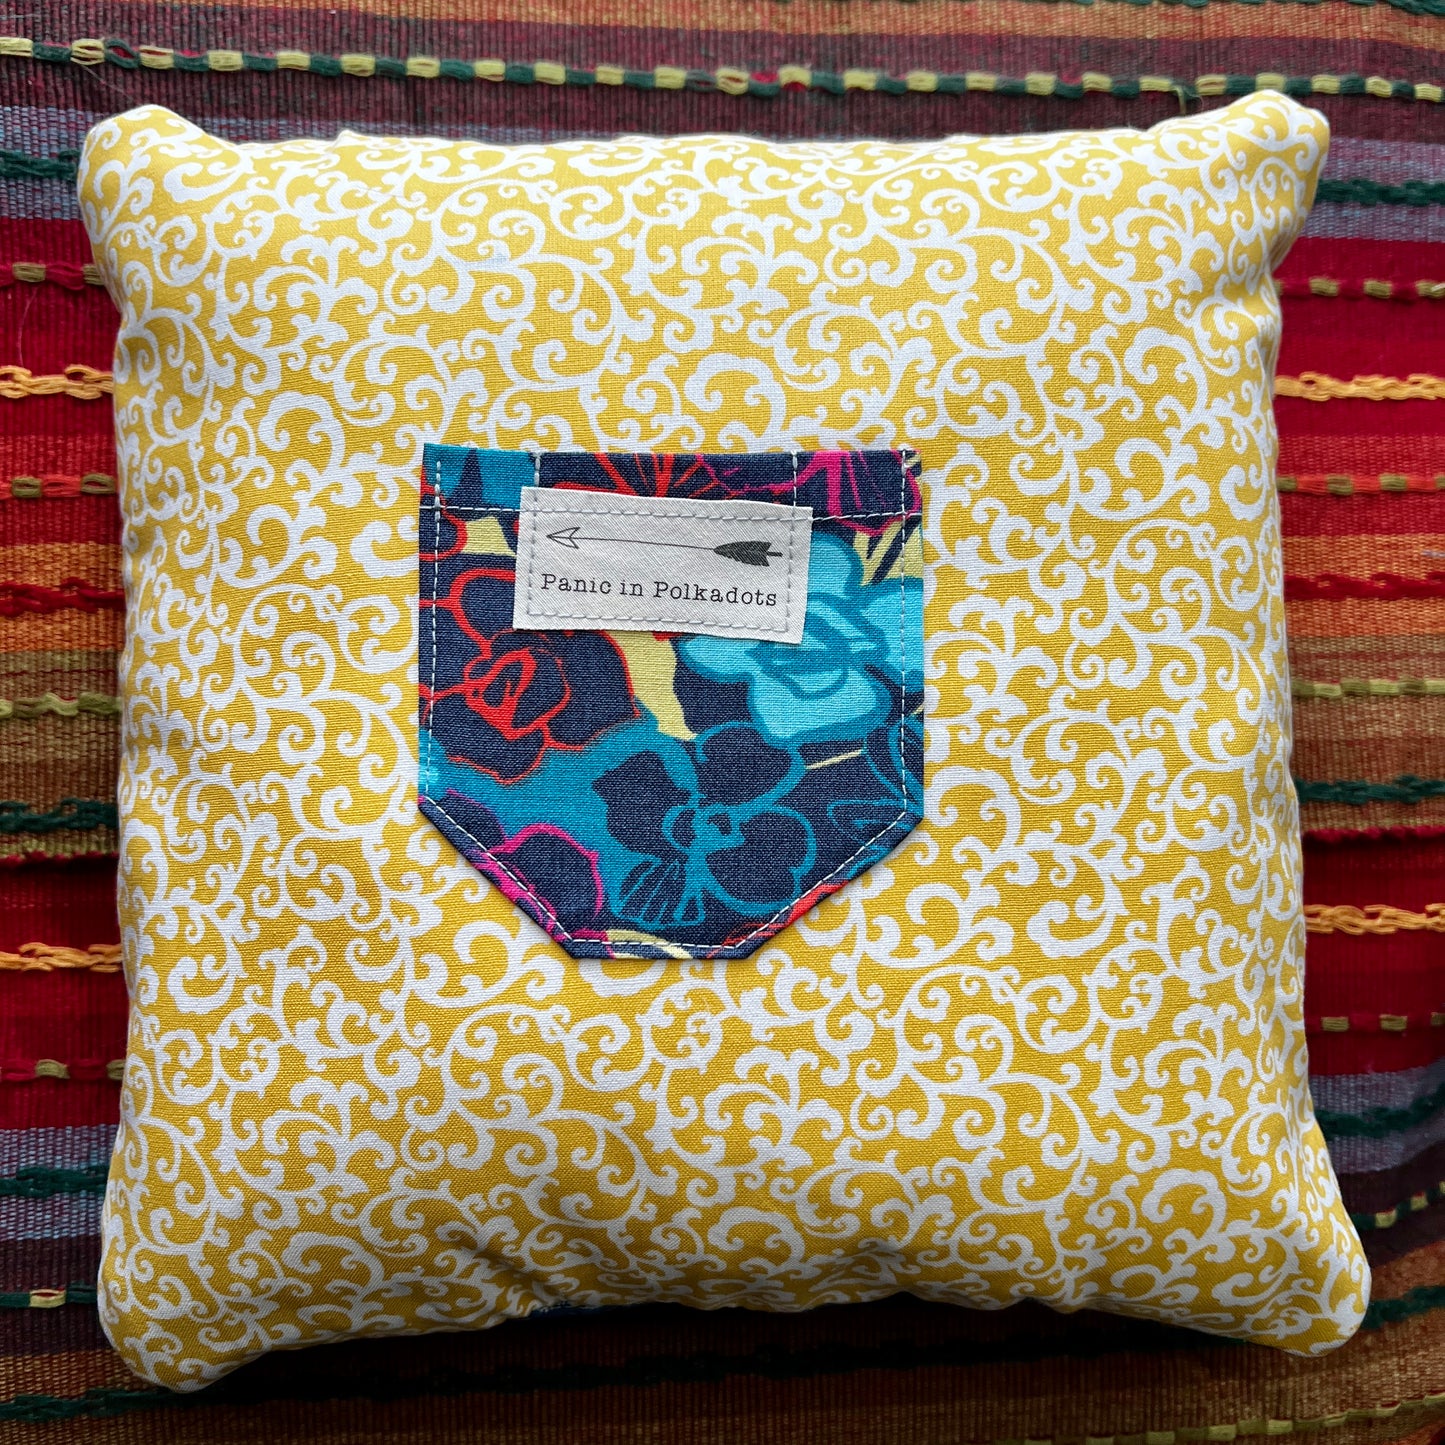 back view of wizrd of oz cathedral square pillow, with swirling yellow print and vibrant floral pocket